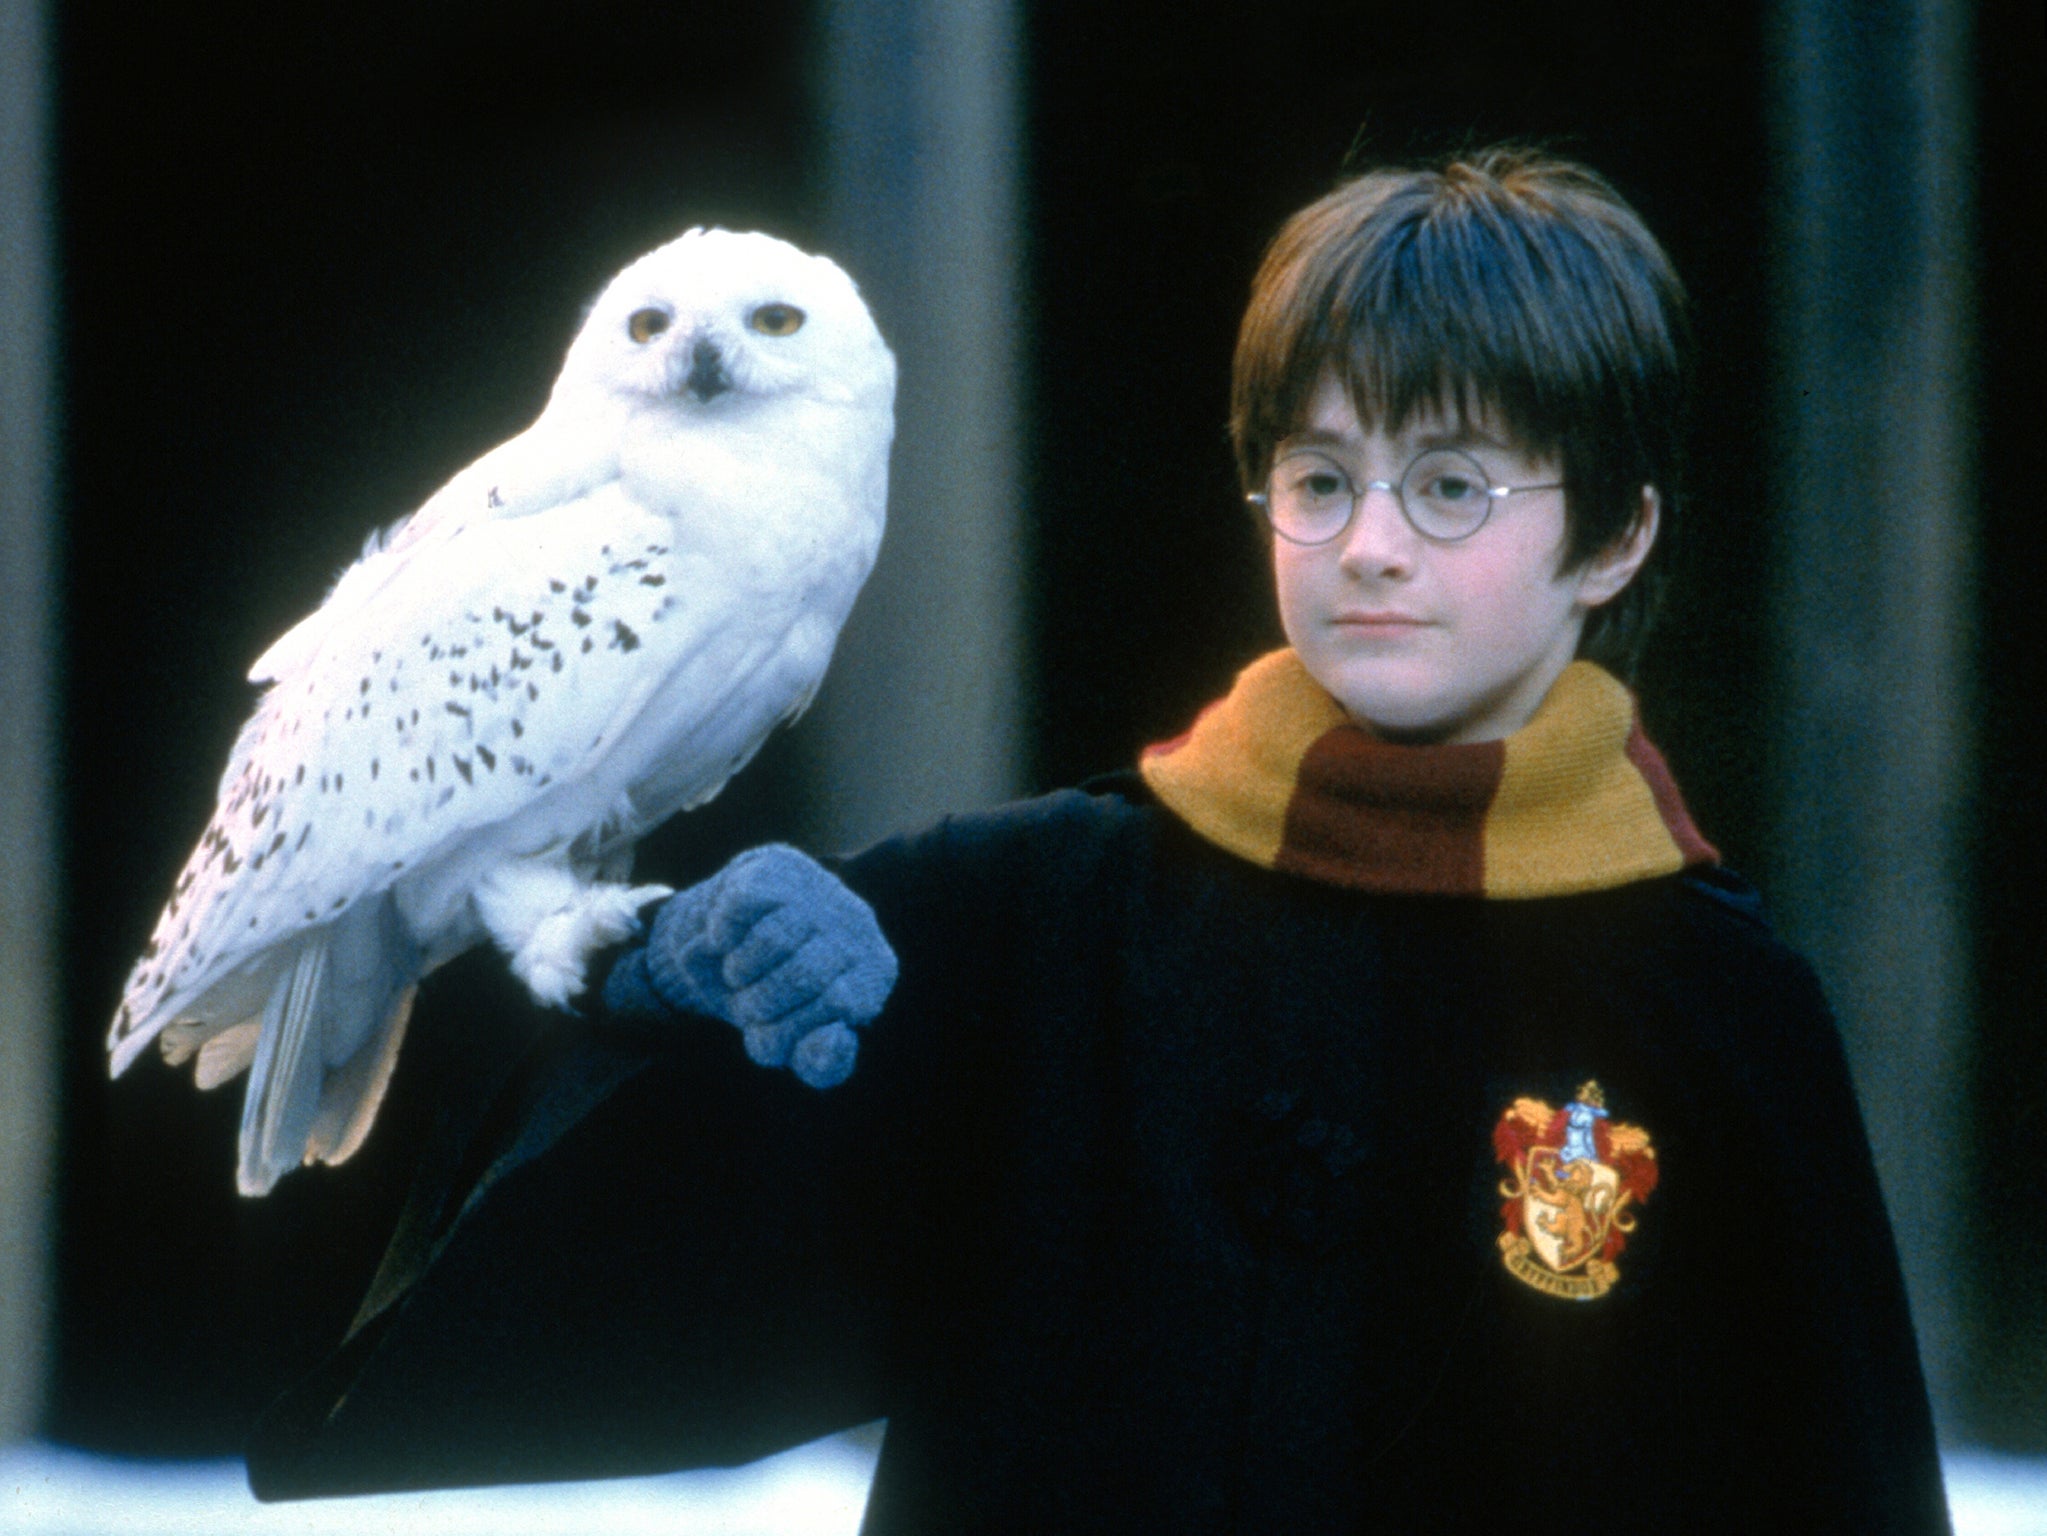 ‘I wanted kids who didn’t have a lot of experience’: Daniel Radcliffe and Hedwig the Owl in ‘Harry Potter and the Philosopher’s Stone'